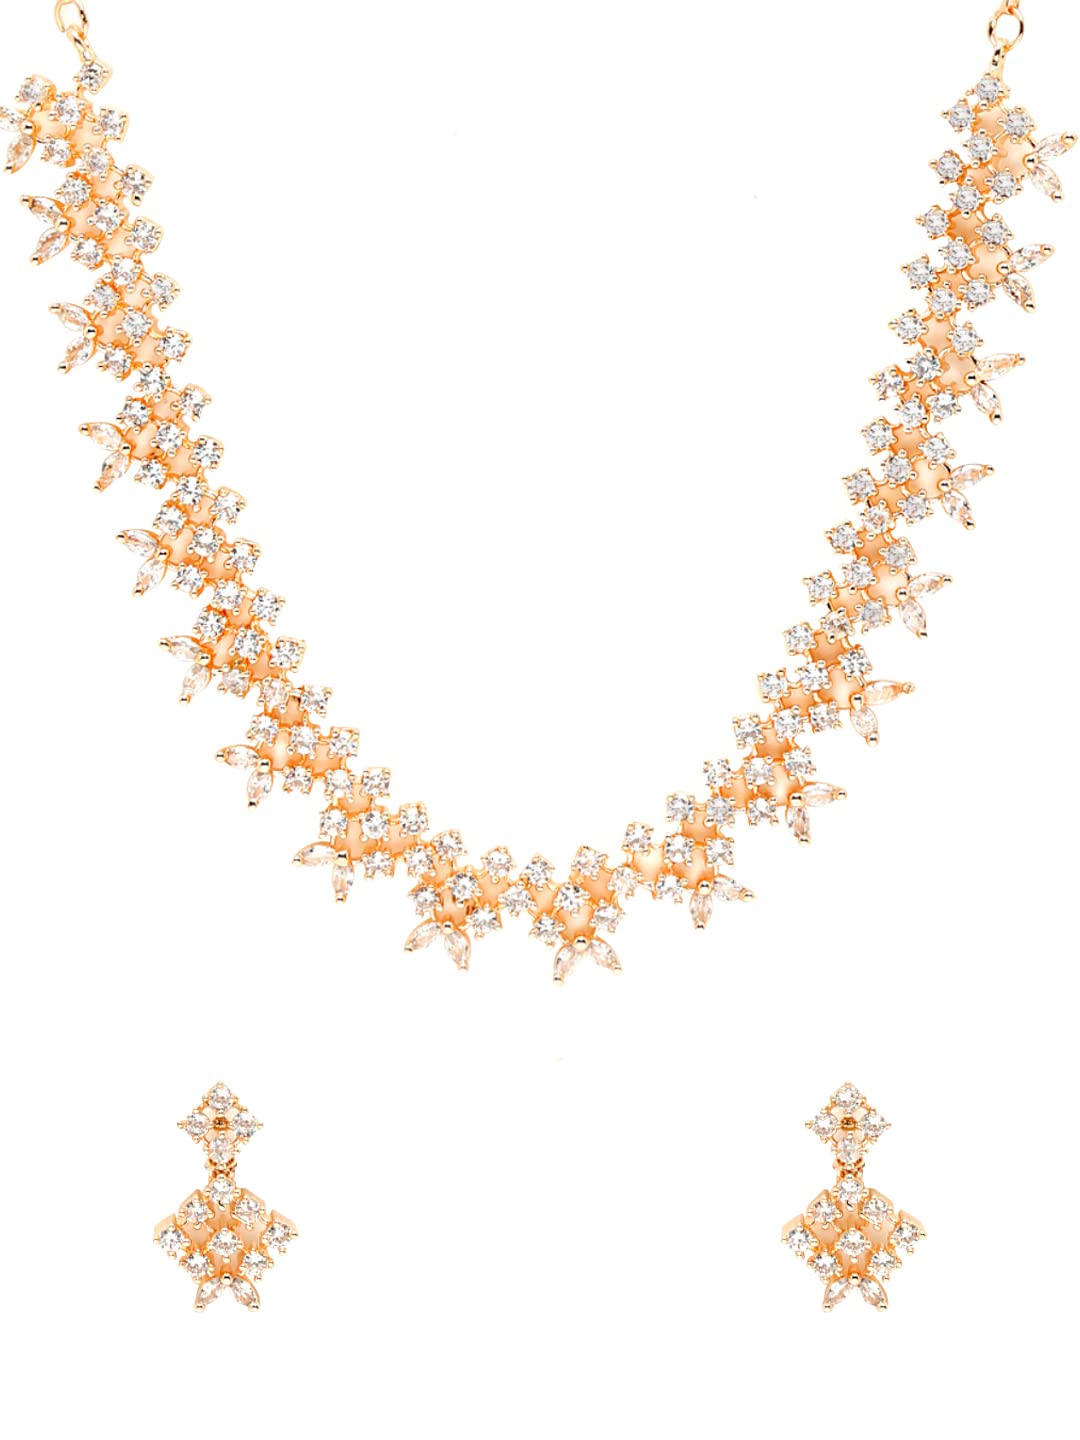 Yellow Chimes American Diamond Jewellery Set for Women Rosegold Plated High Grade Authentic White AD Jewellery Necklace Set for Women and Girls